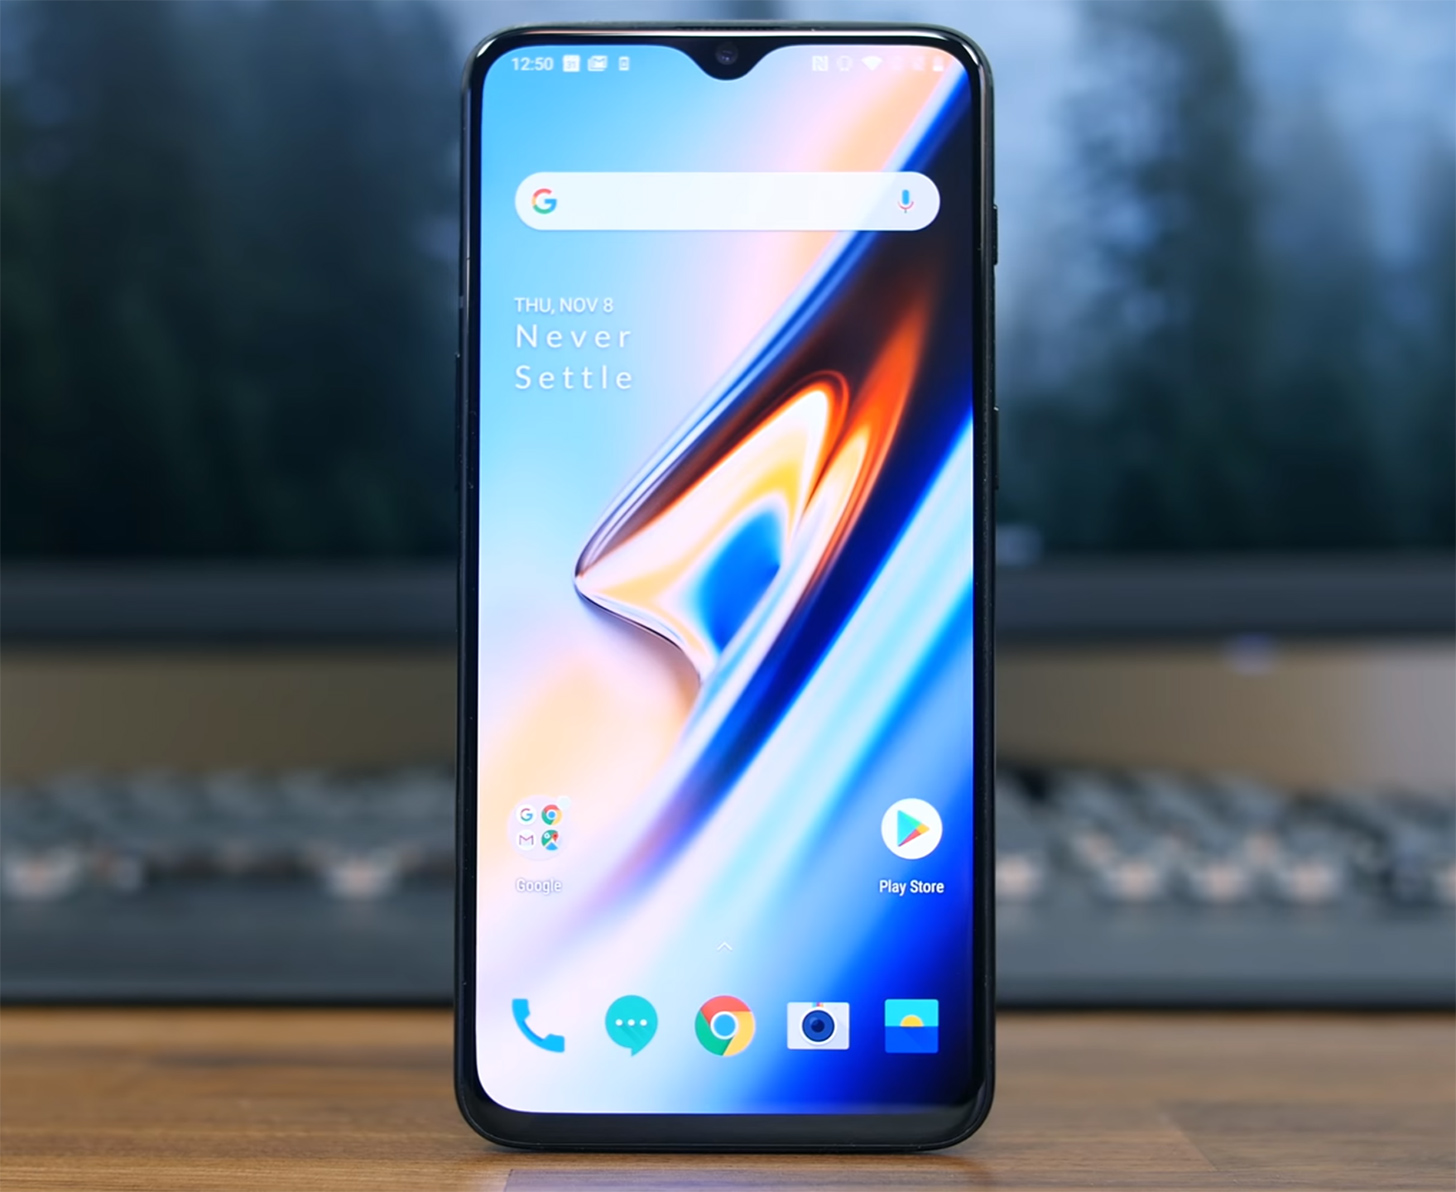 Oneplus 6T McLaren, the Fastest Smart Cell Phone on the Market